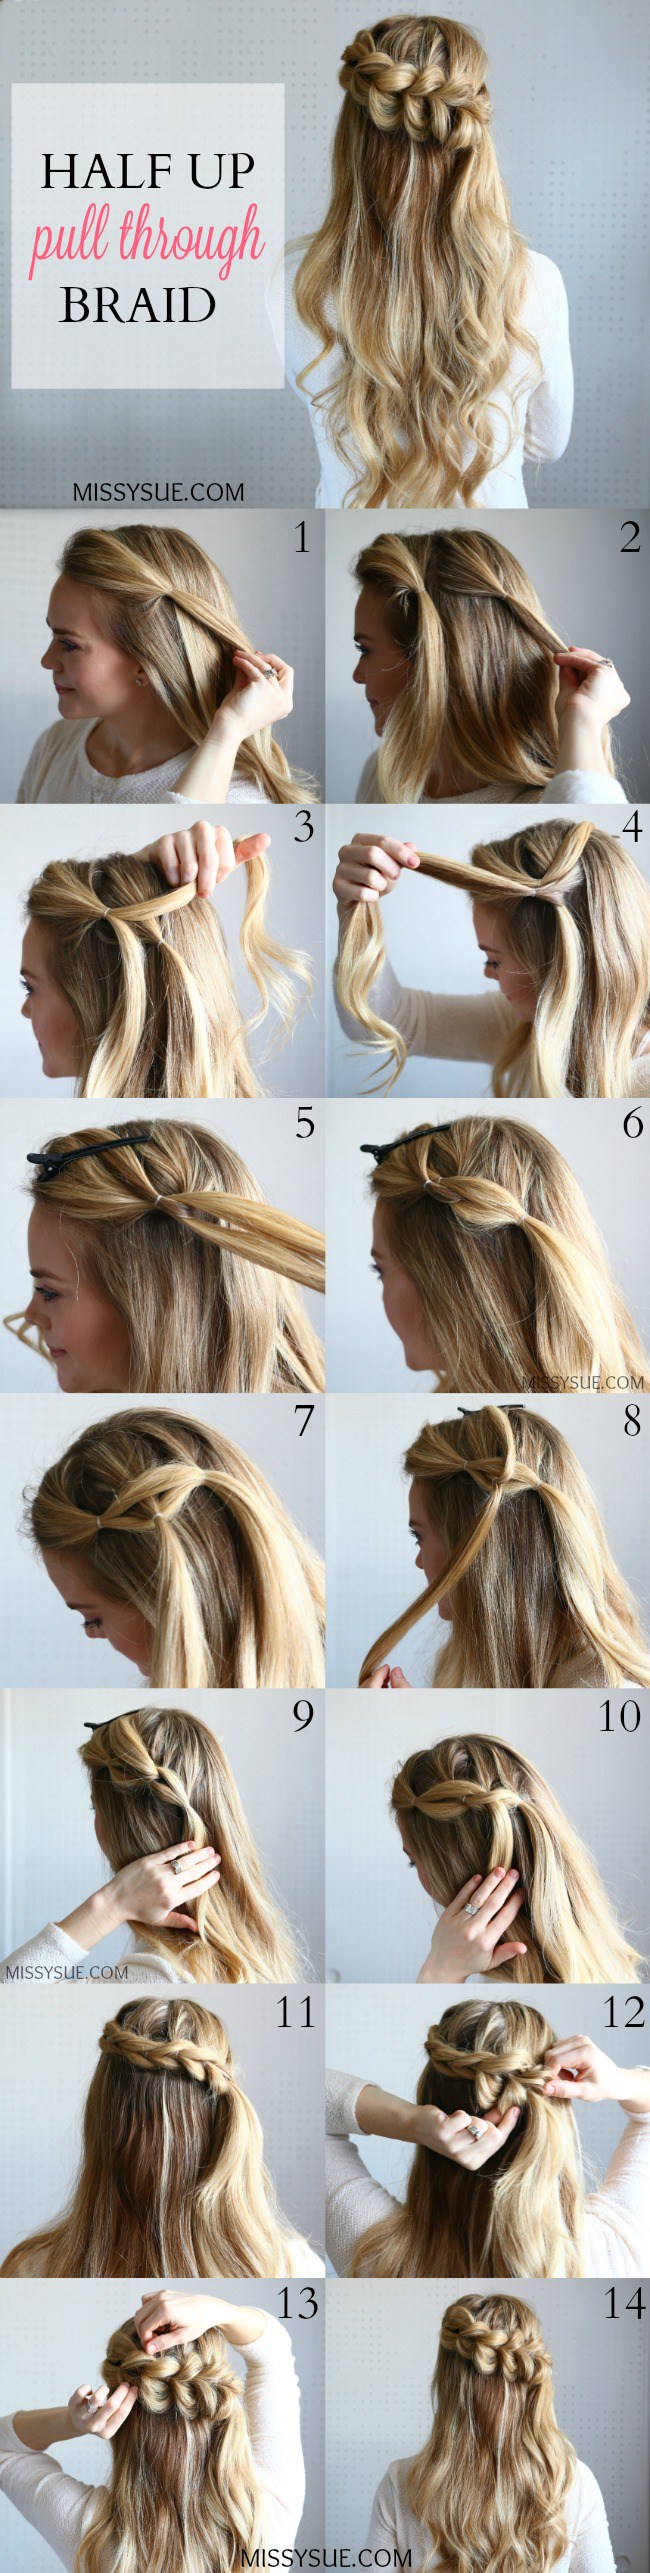 15 Braided Hair Tutorials You Should Copy Till The End Of The Summer